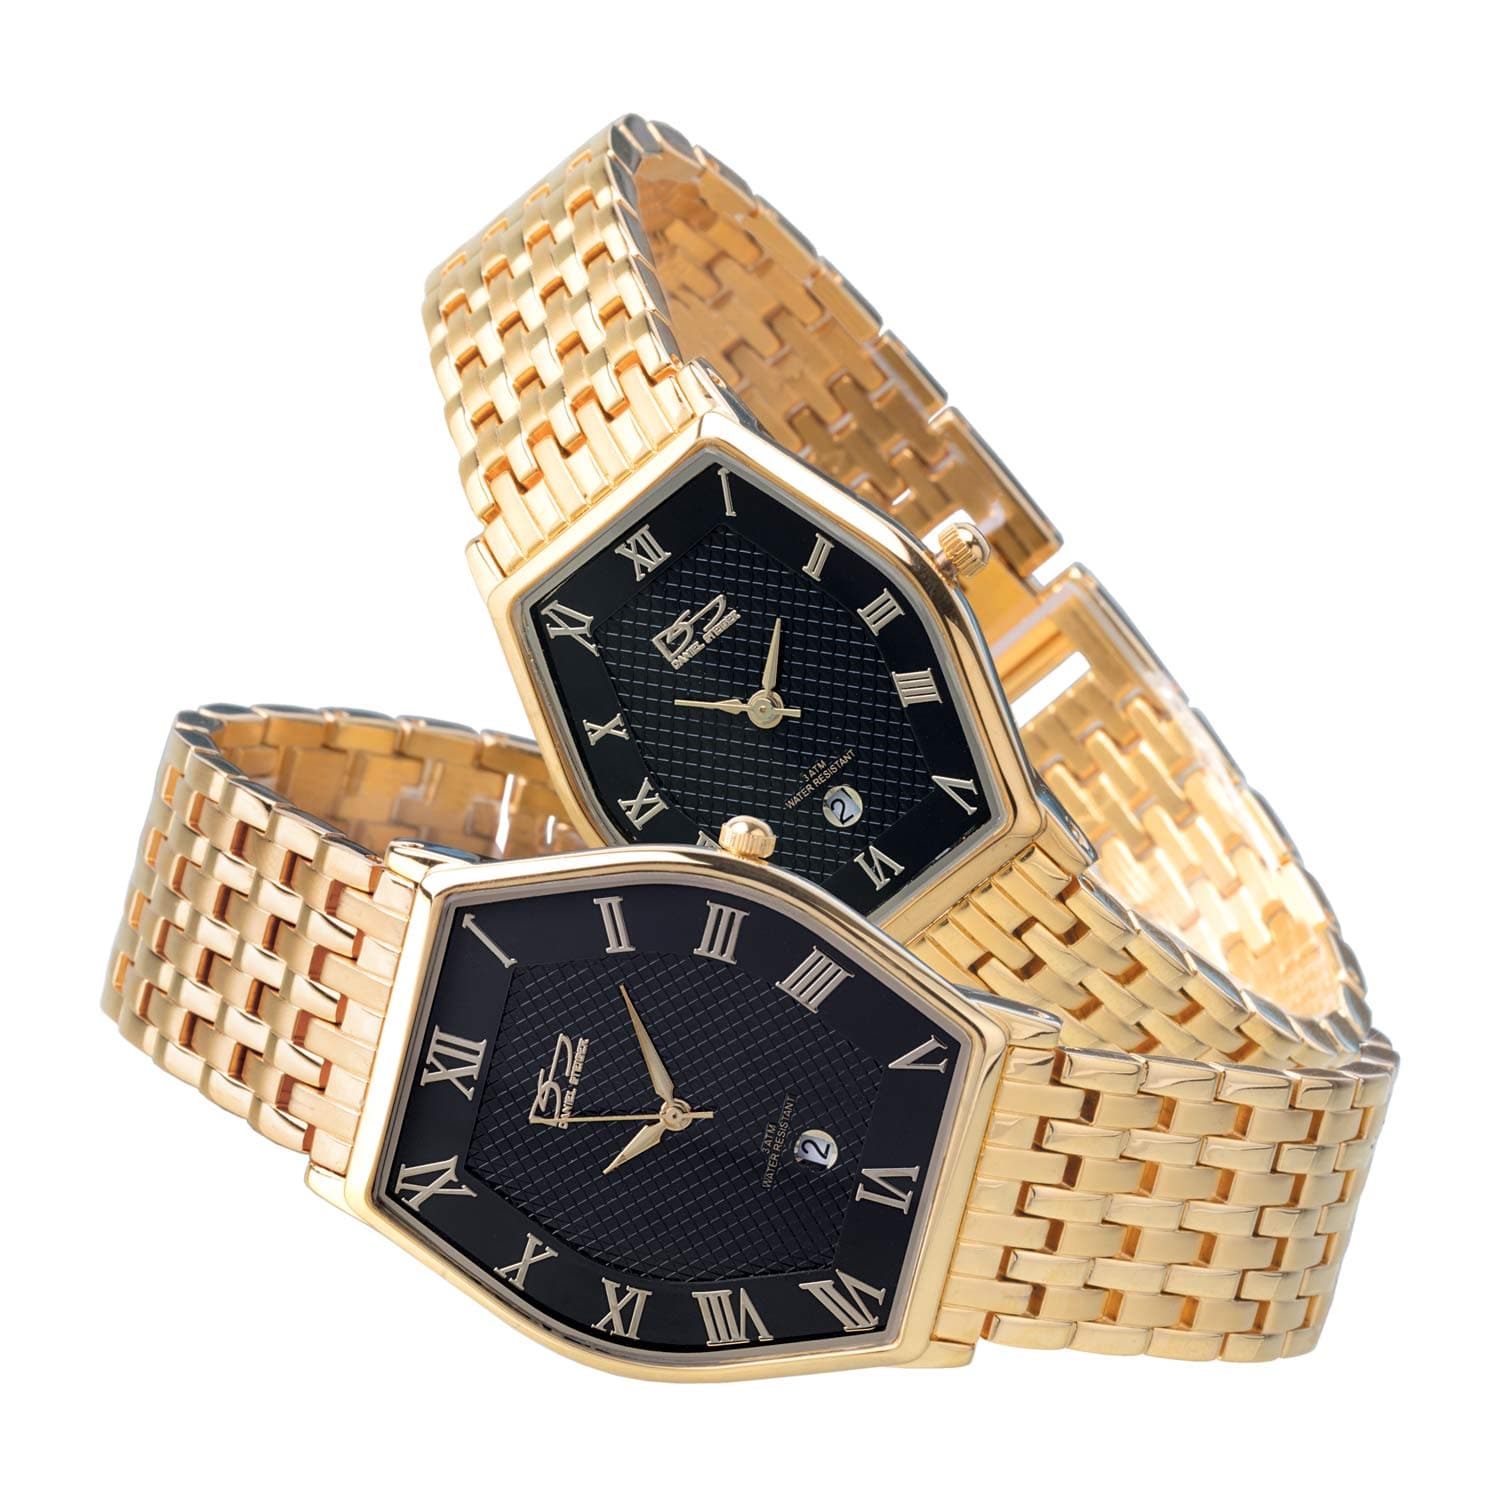 Sterling Tonneau Watches - Buy Any 2